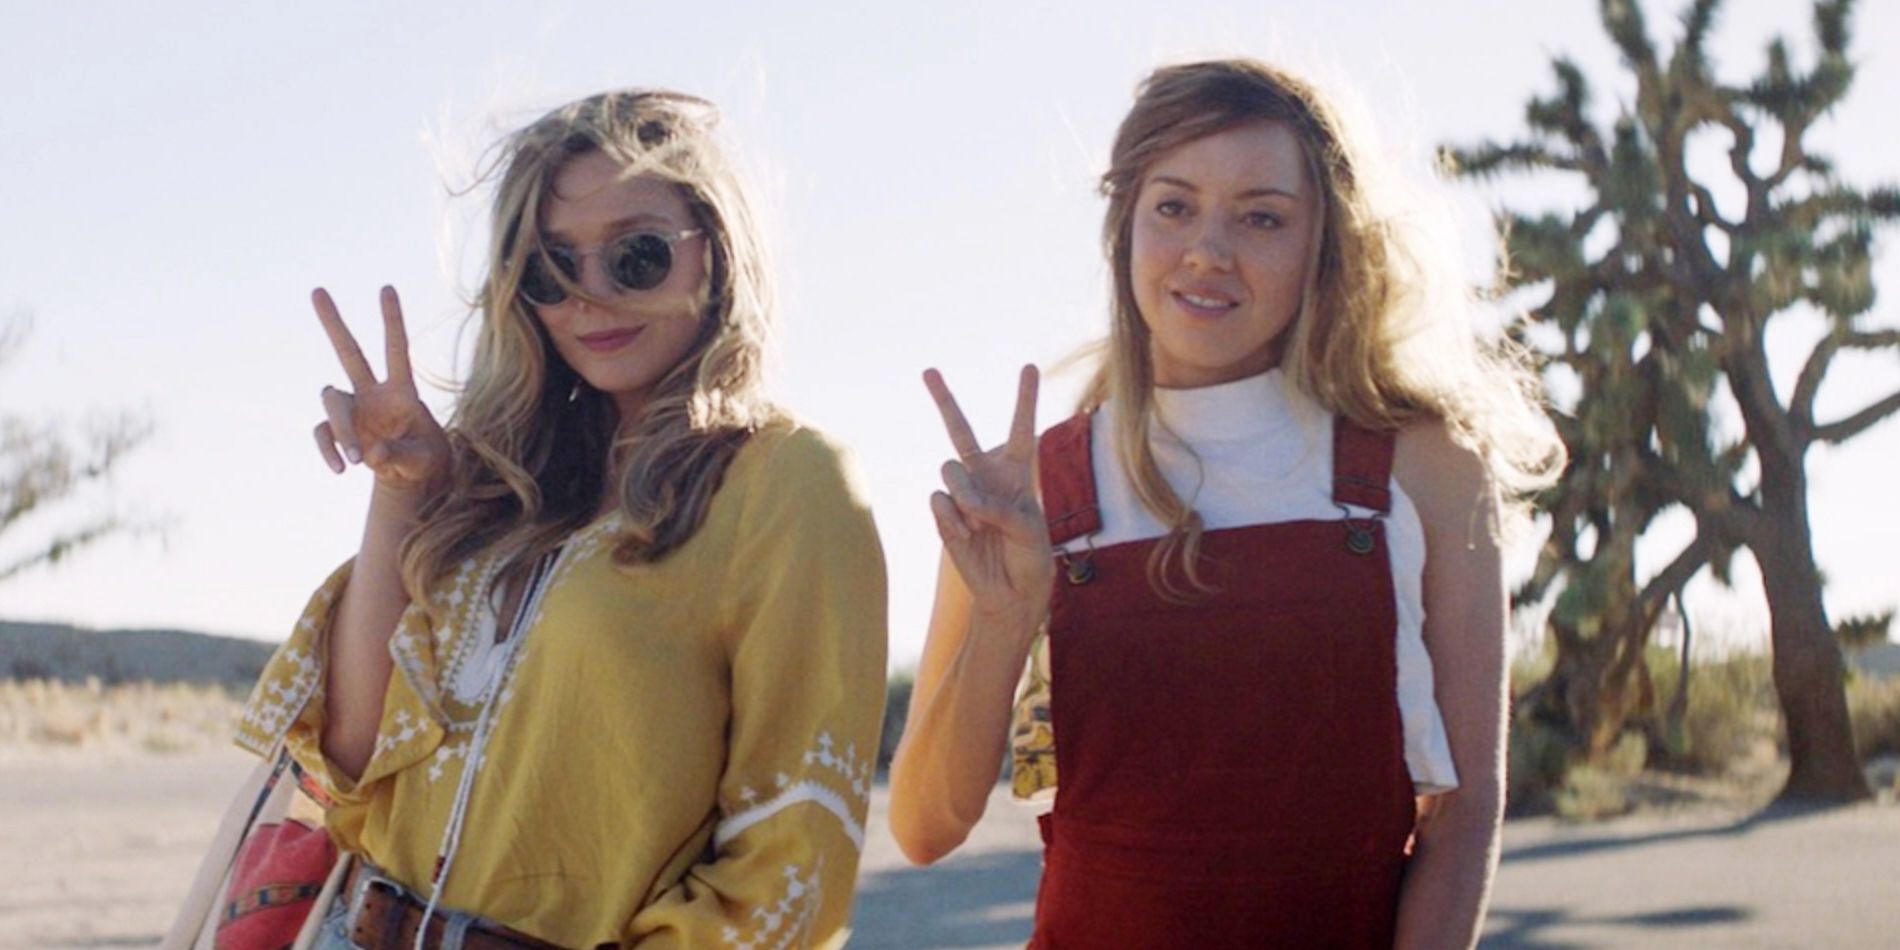 Taylor and Ingrid posing and doing the peace sign in Ingrid Goes West